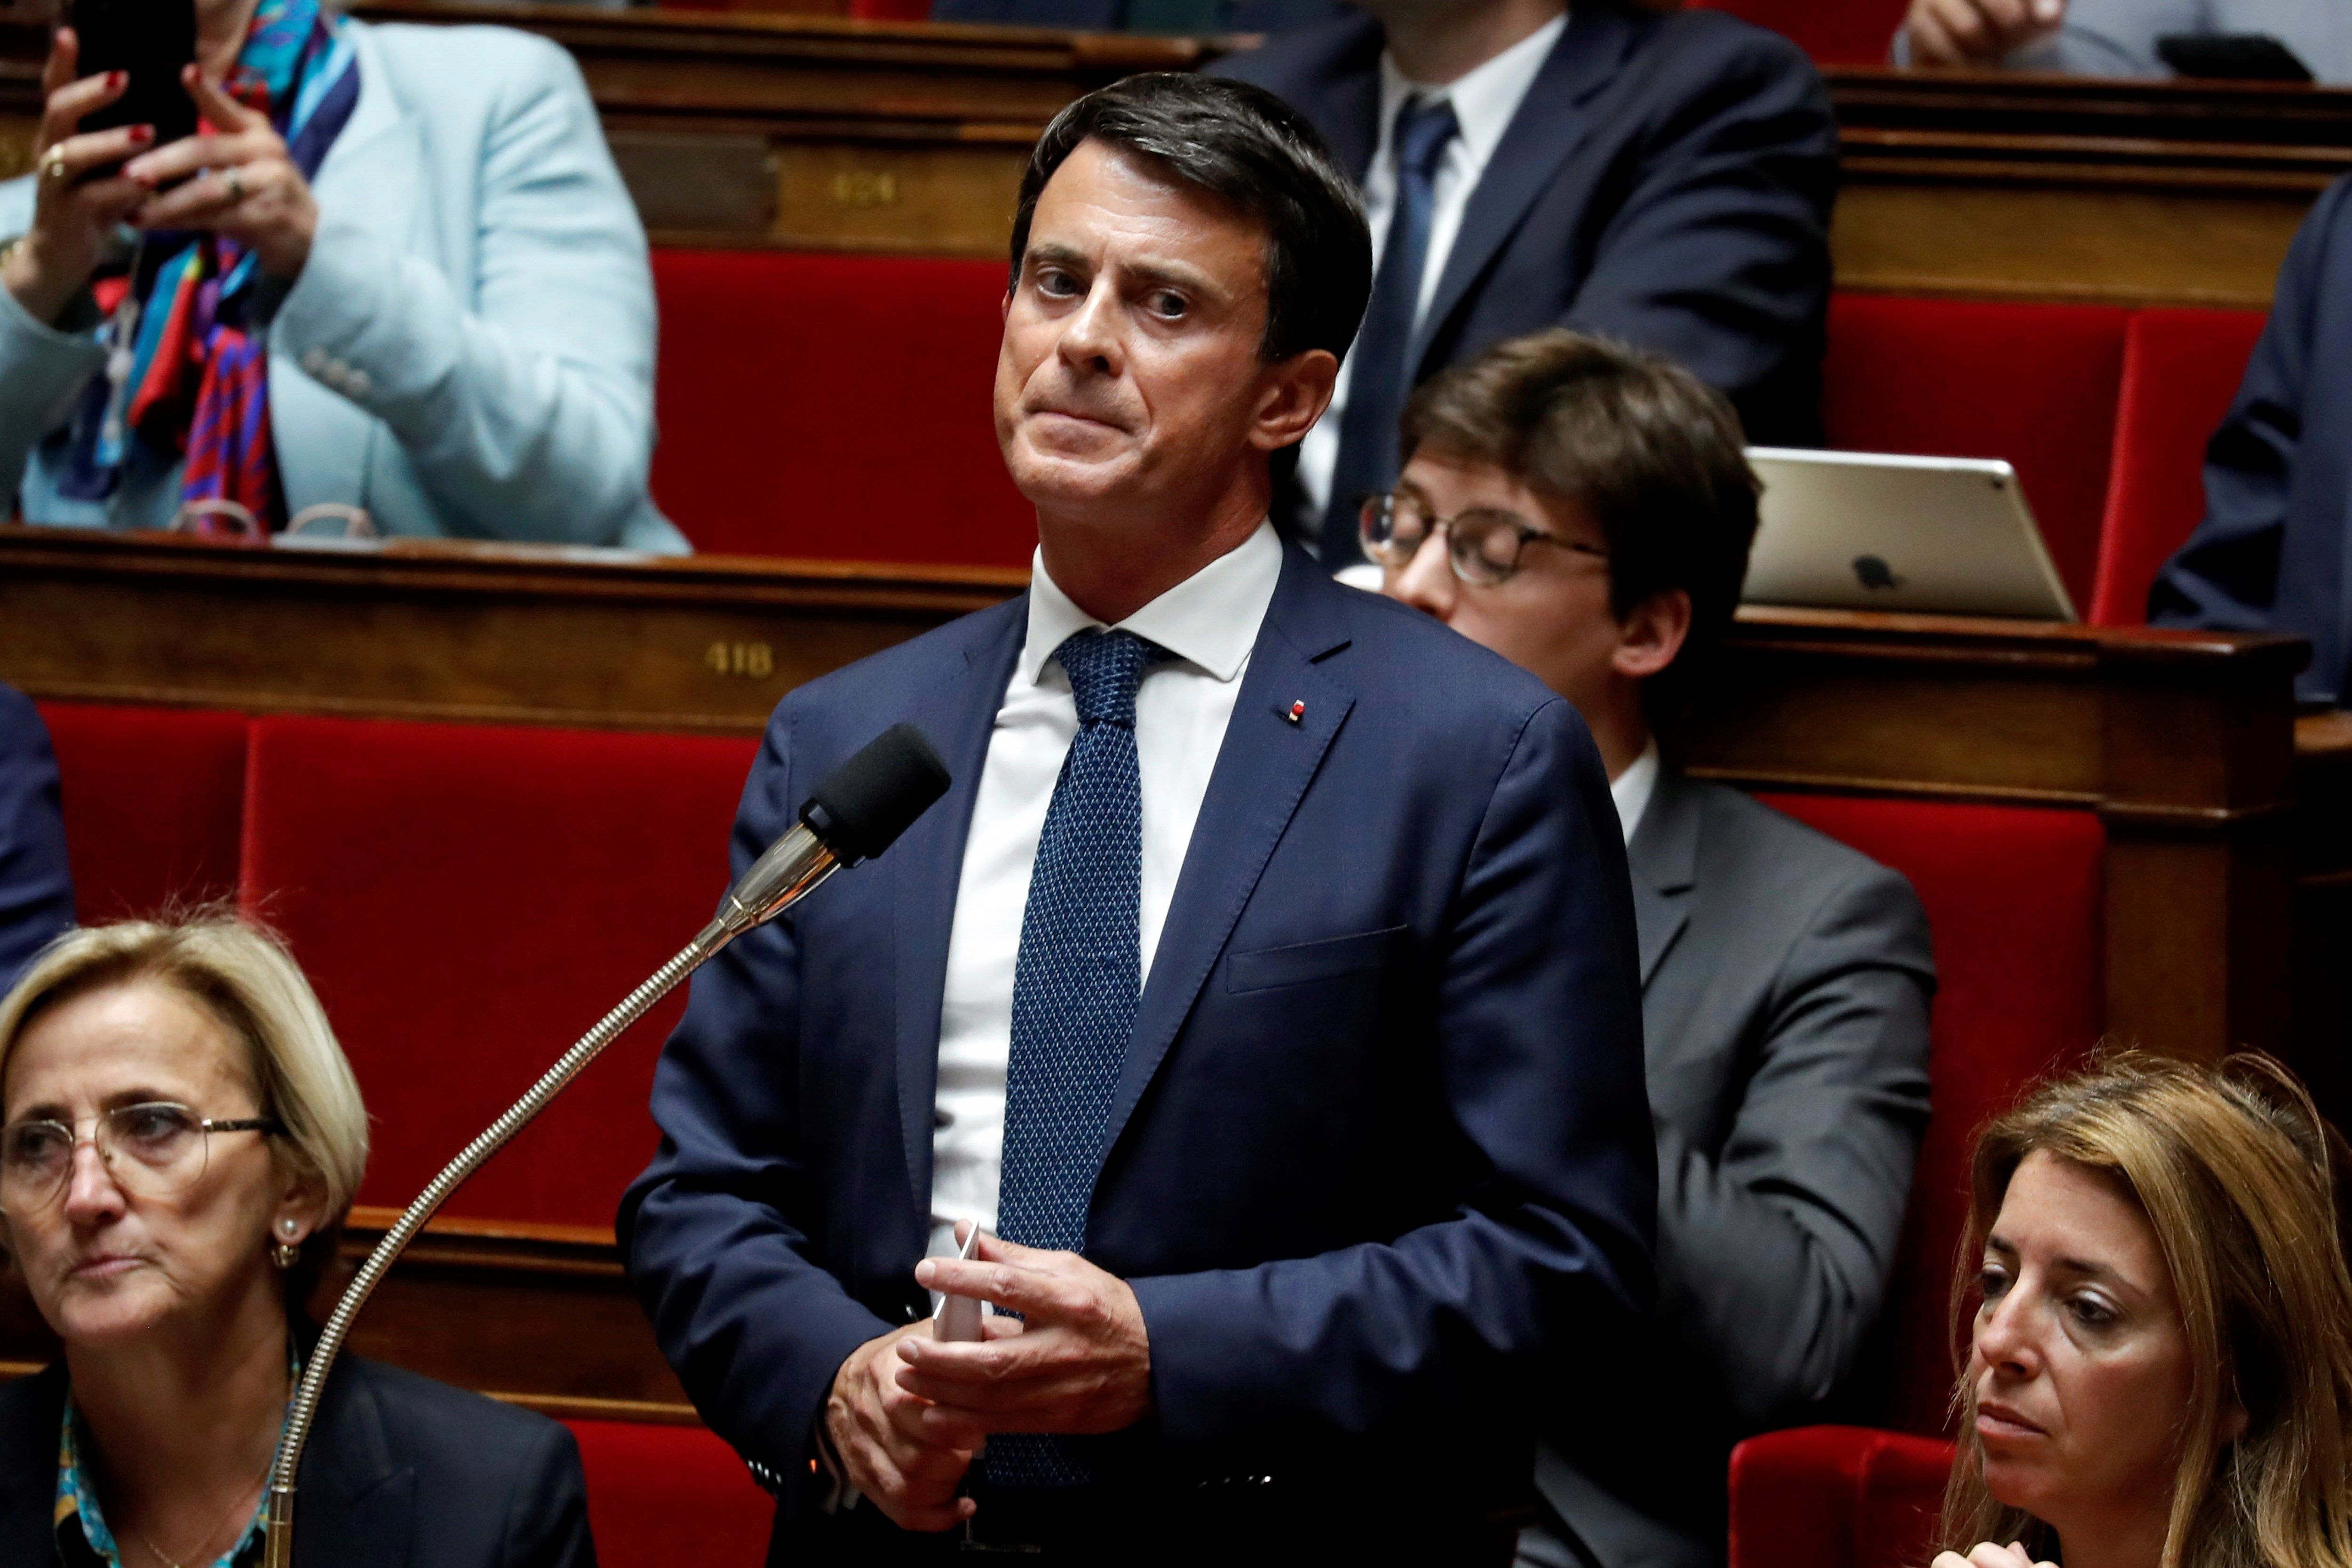 "Good riddance", how the French National Assembly bid Manuel Valls farewell